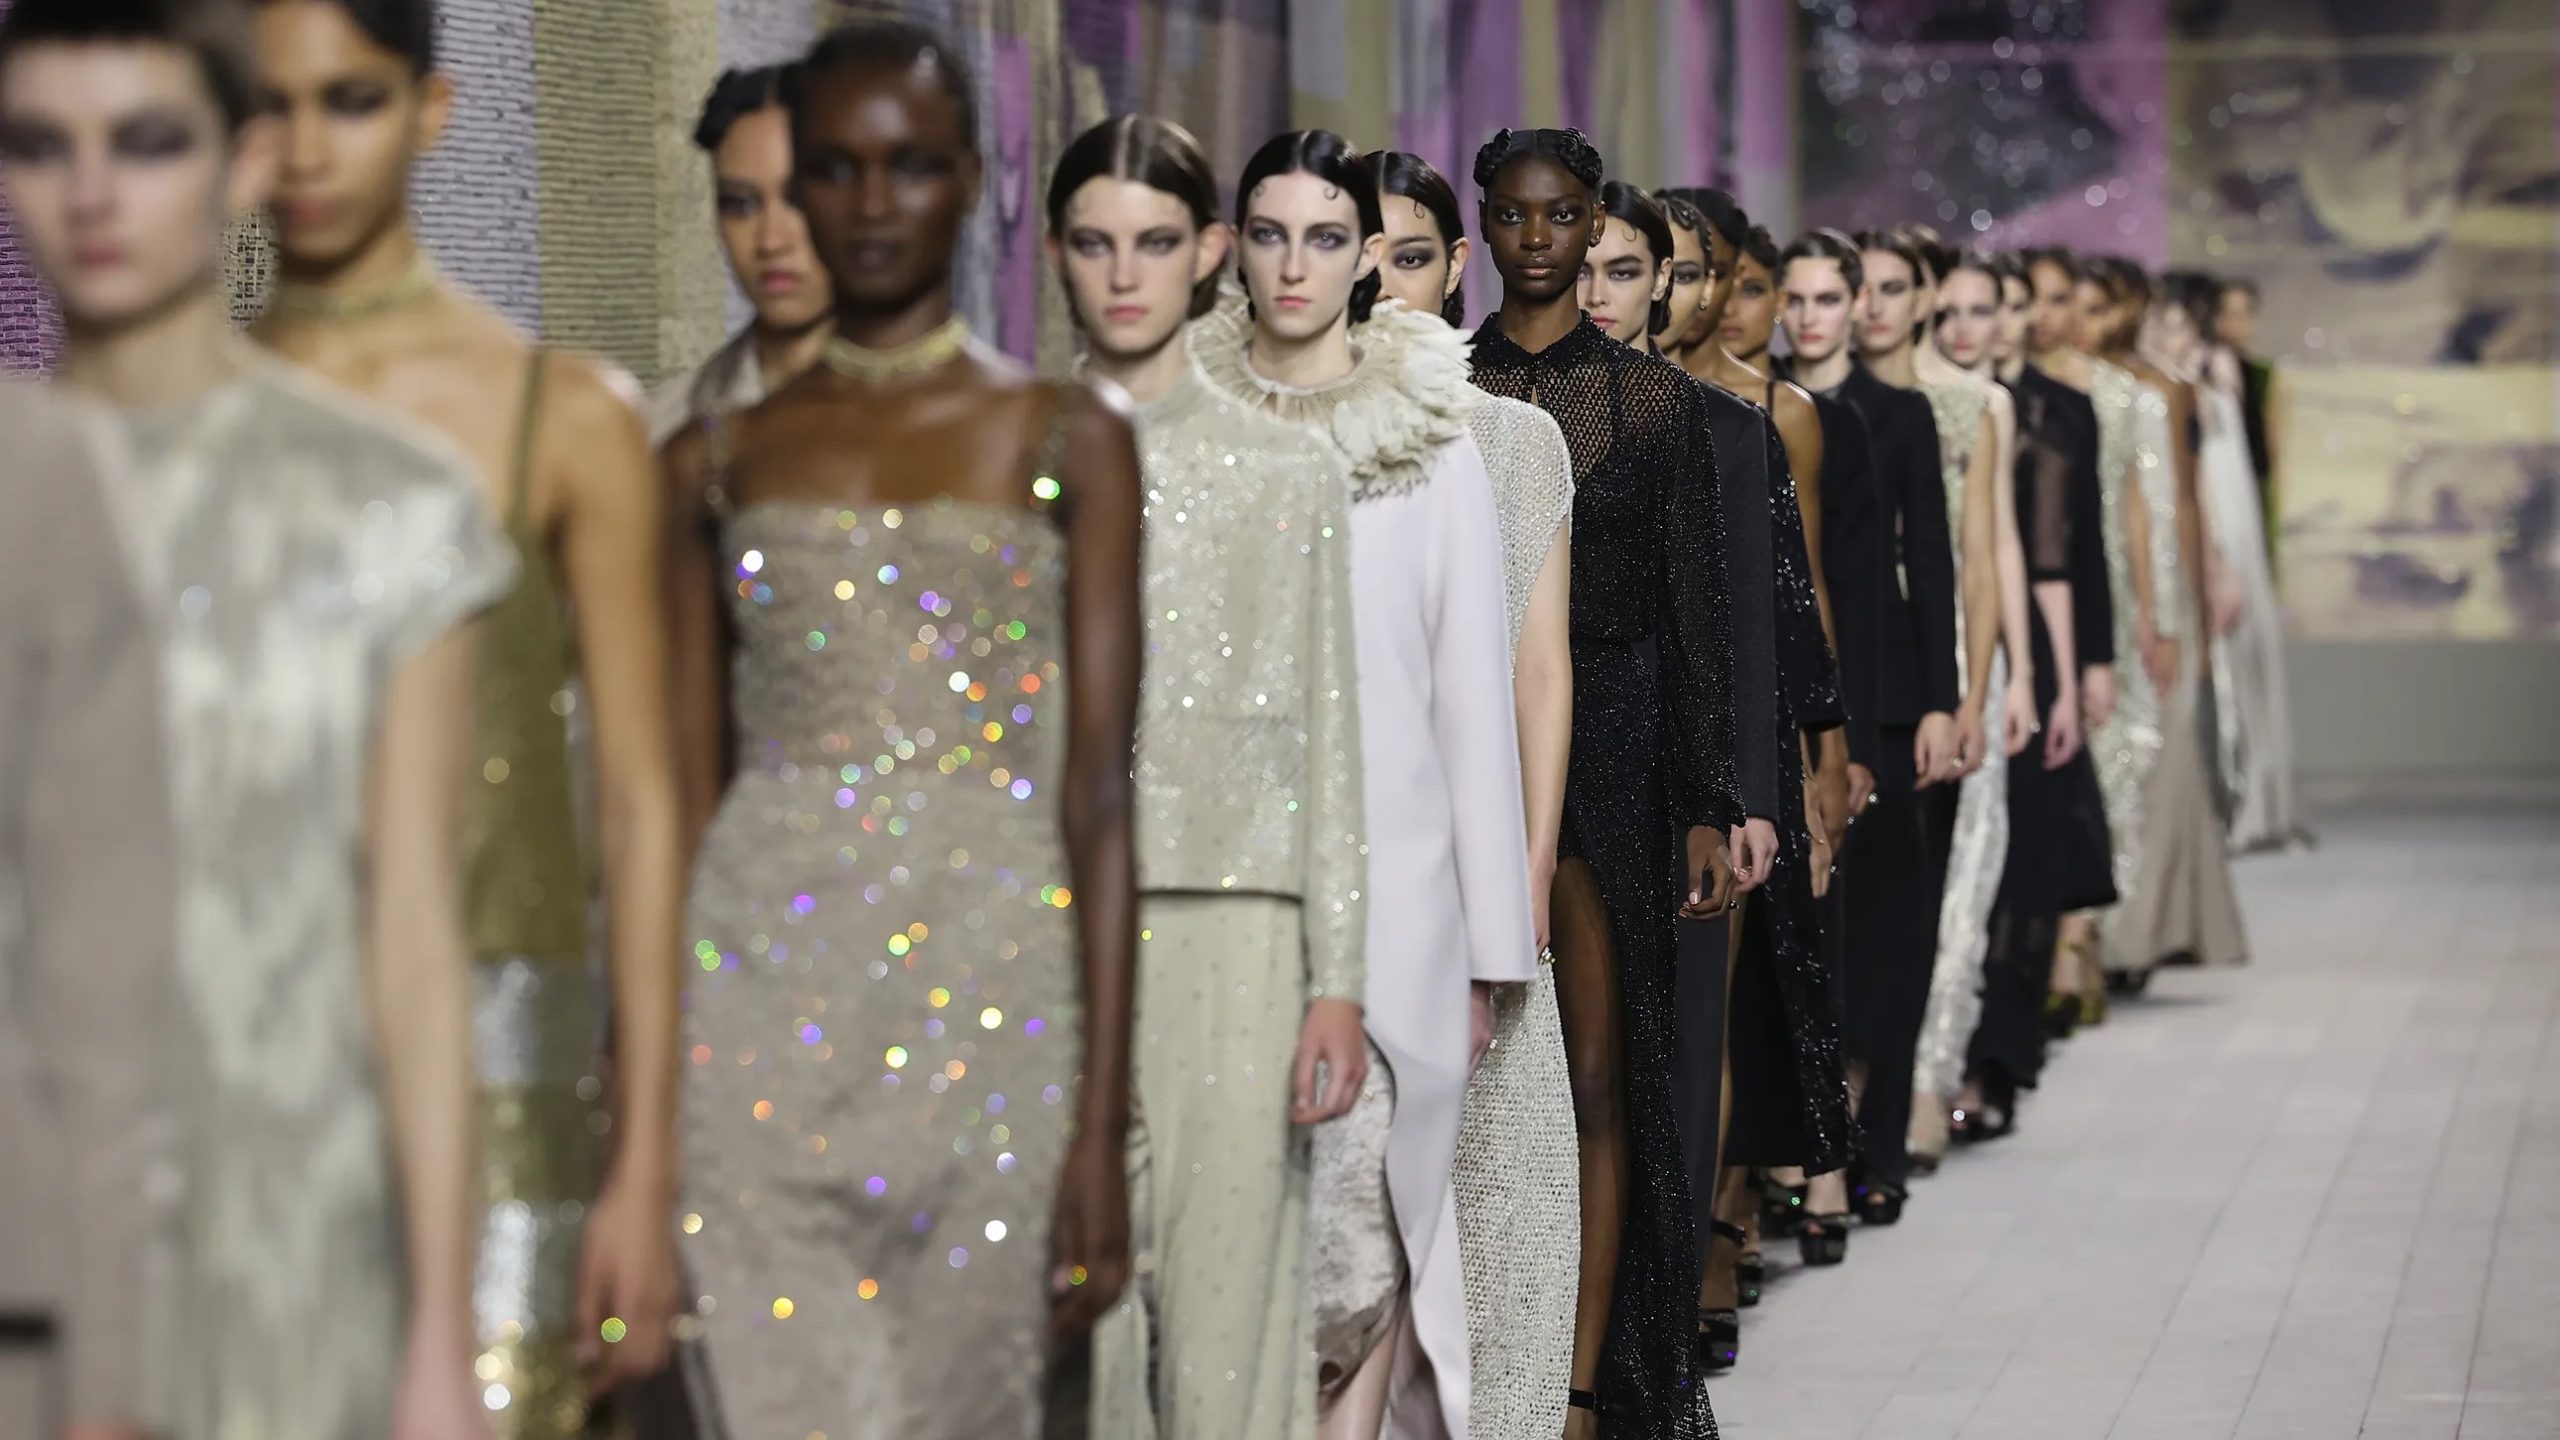 5 highlights from the Dior Couture Spring/Summer 2023 show